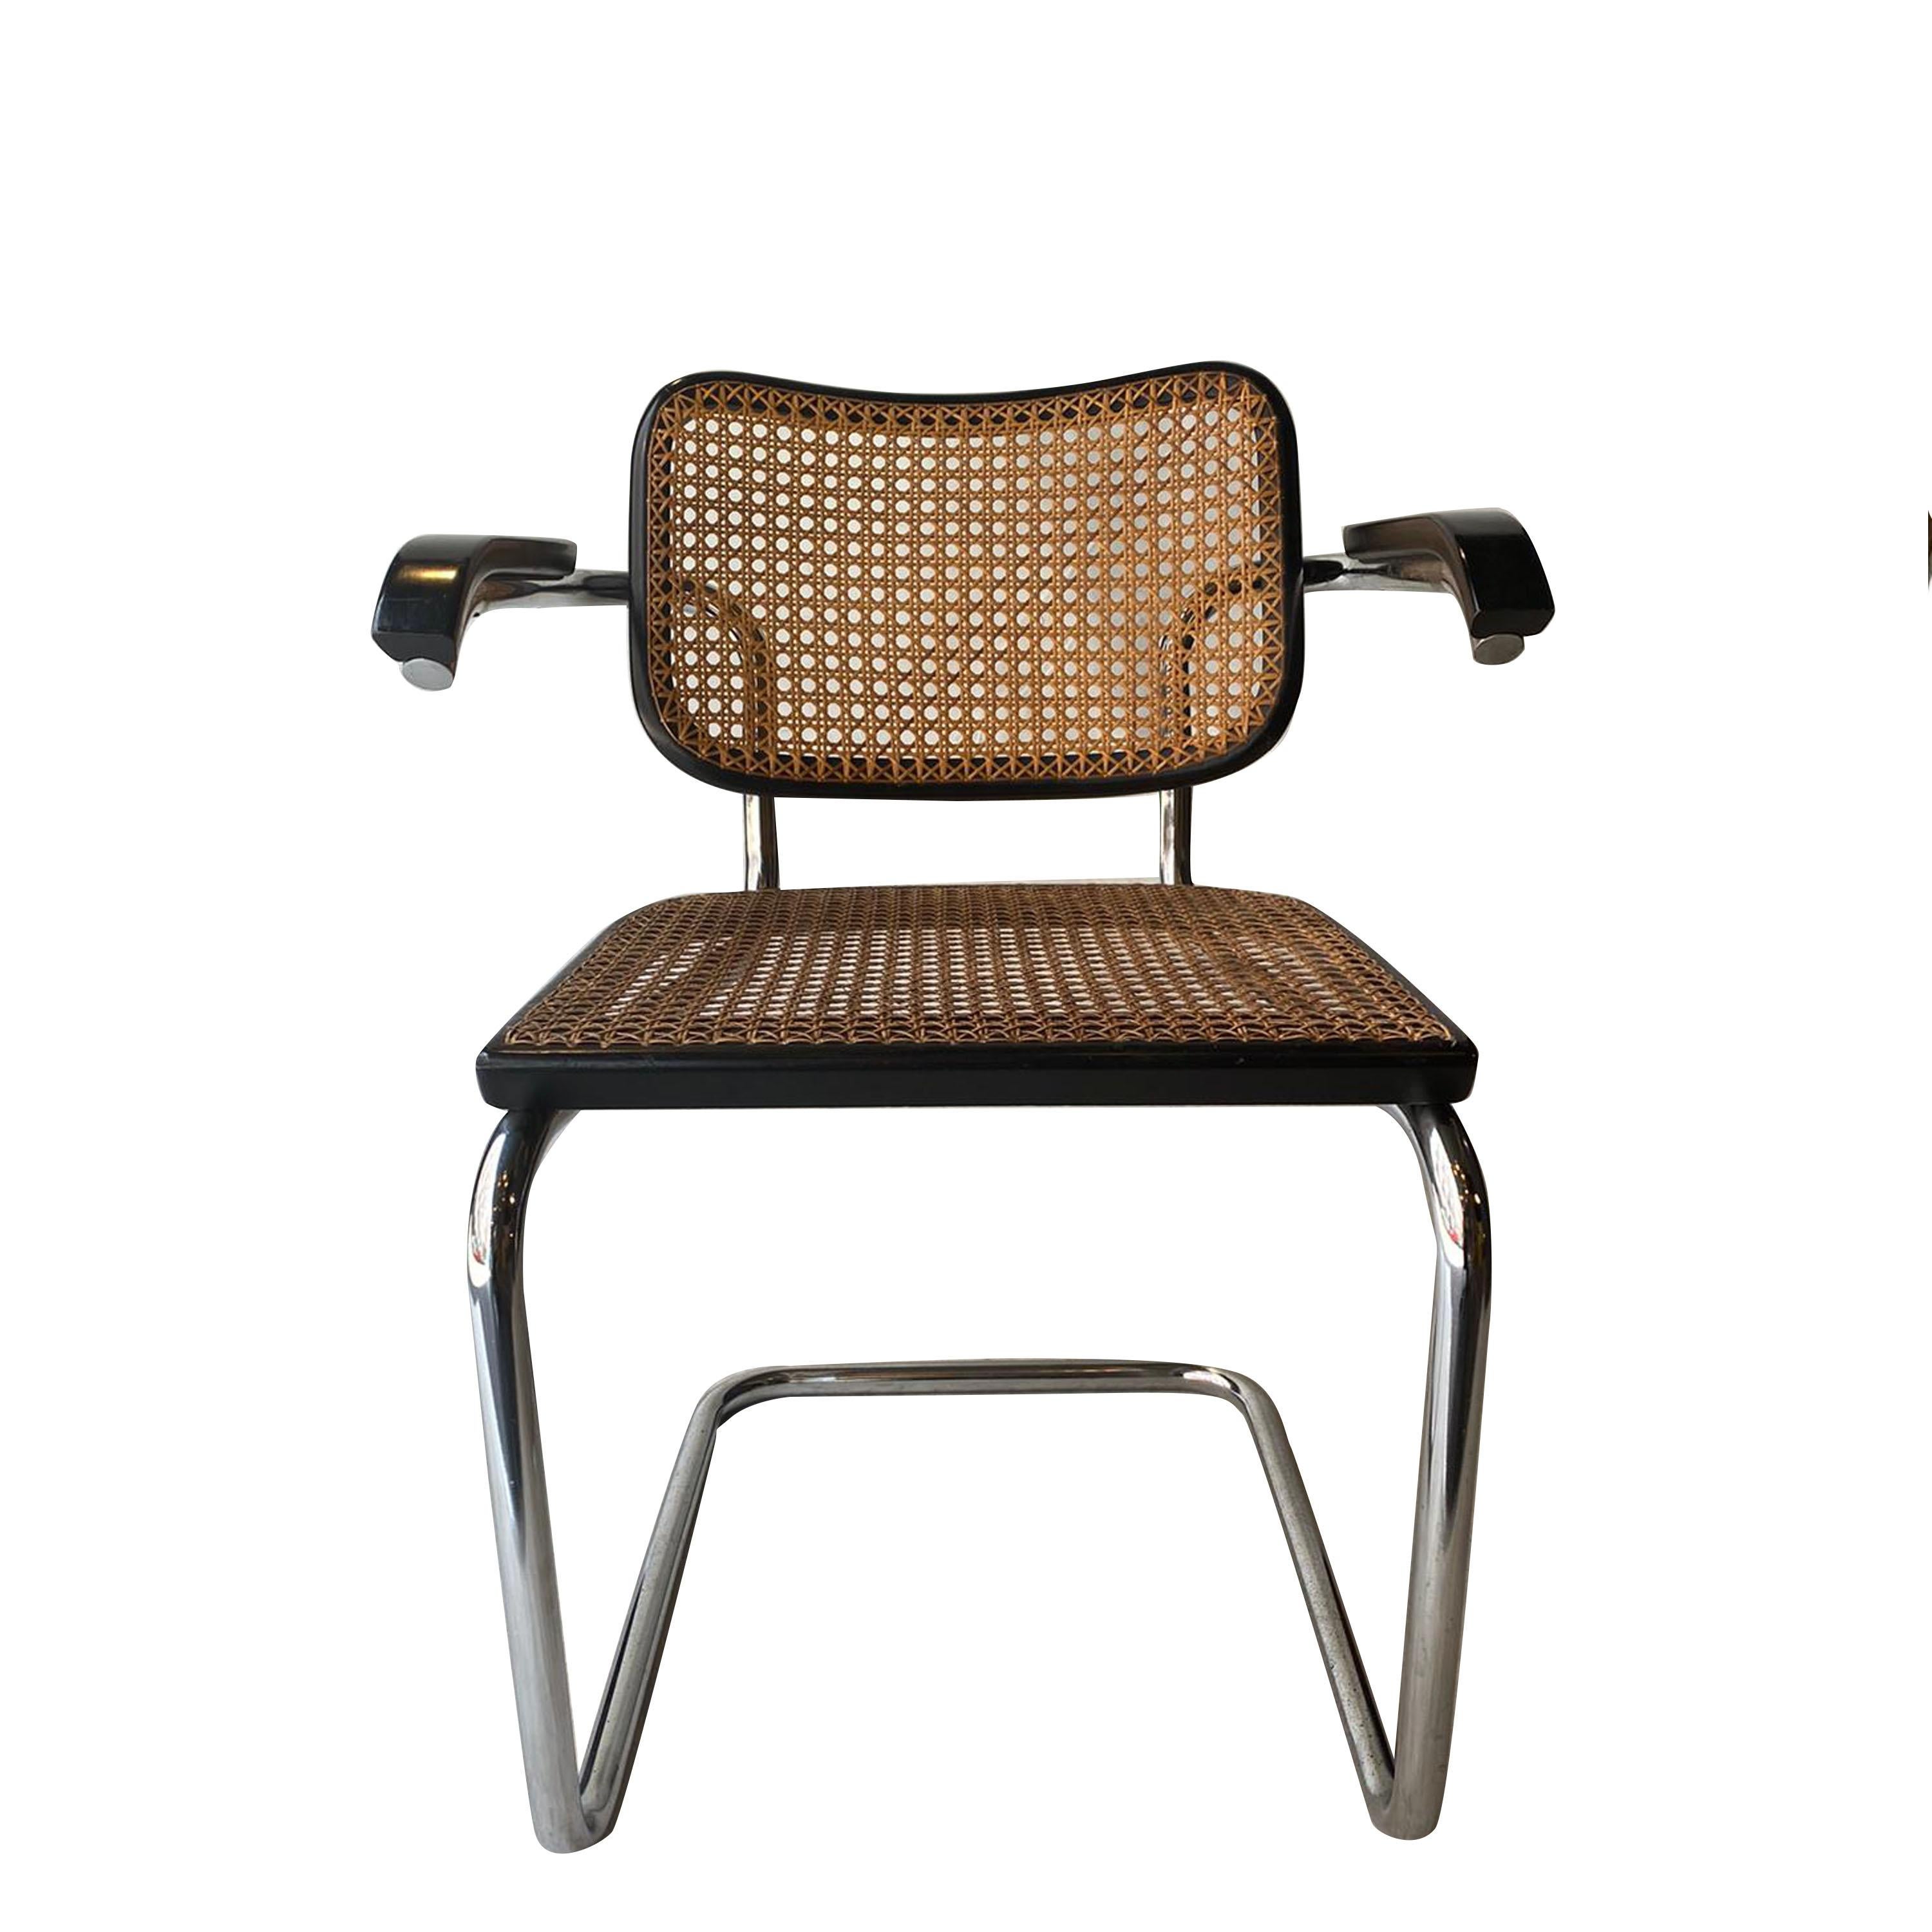 Chairs, model Cesca, designed by Marcel Breuer.
Manufactured in Italy around 1960 by Gavina manufacturer.

Metal pipe frame, wood seat and back structure and rattan.